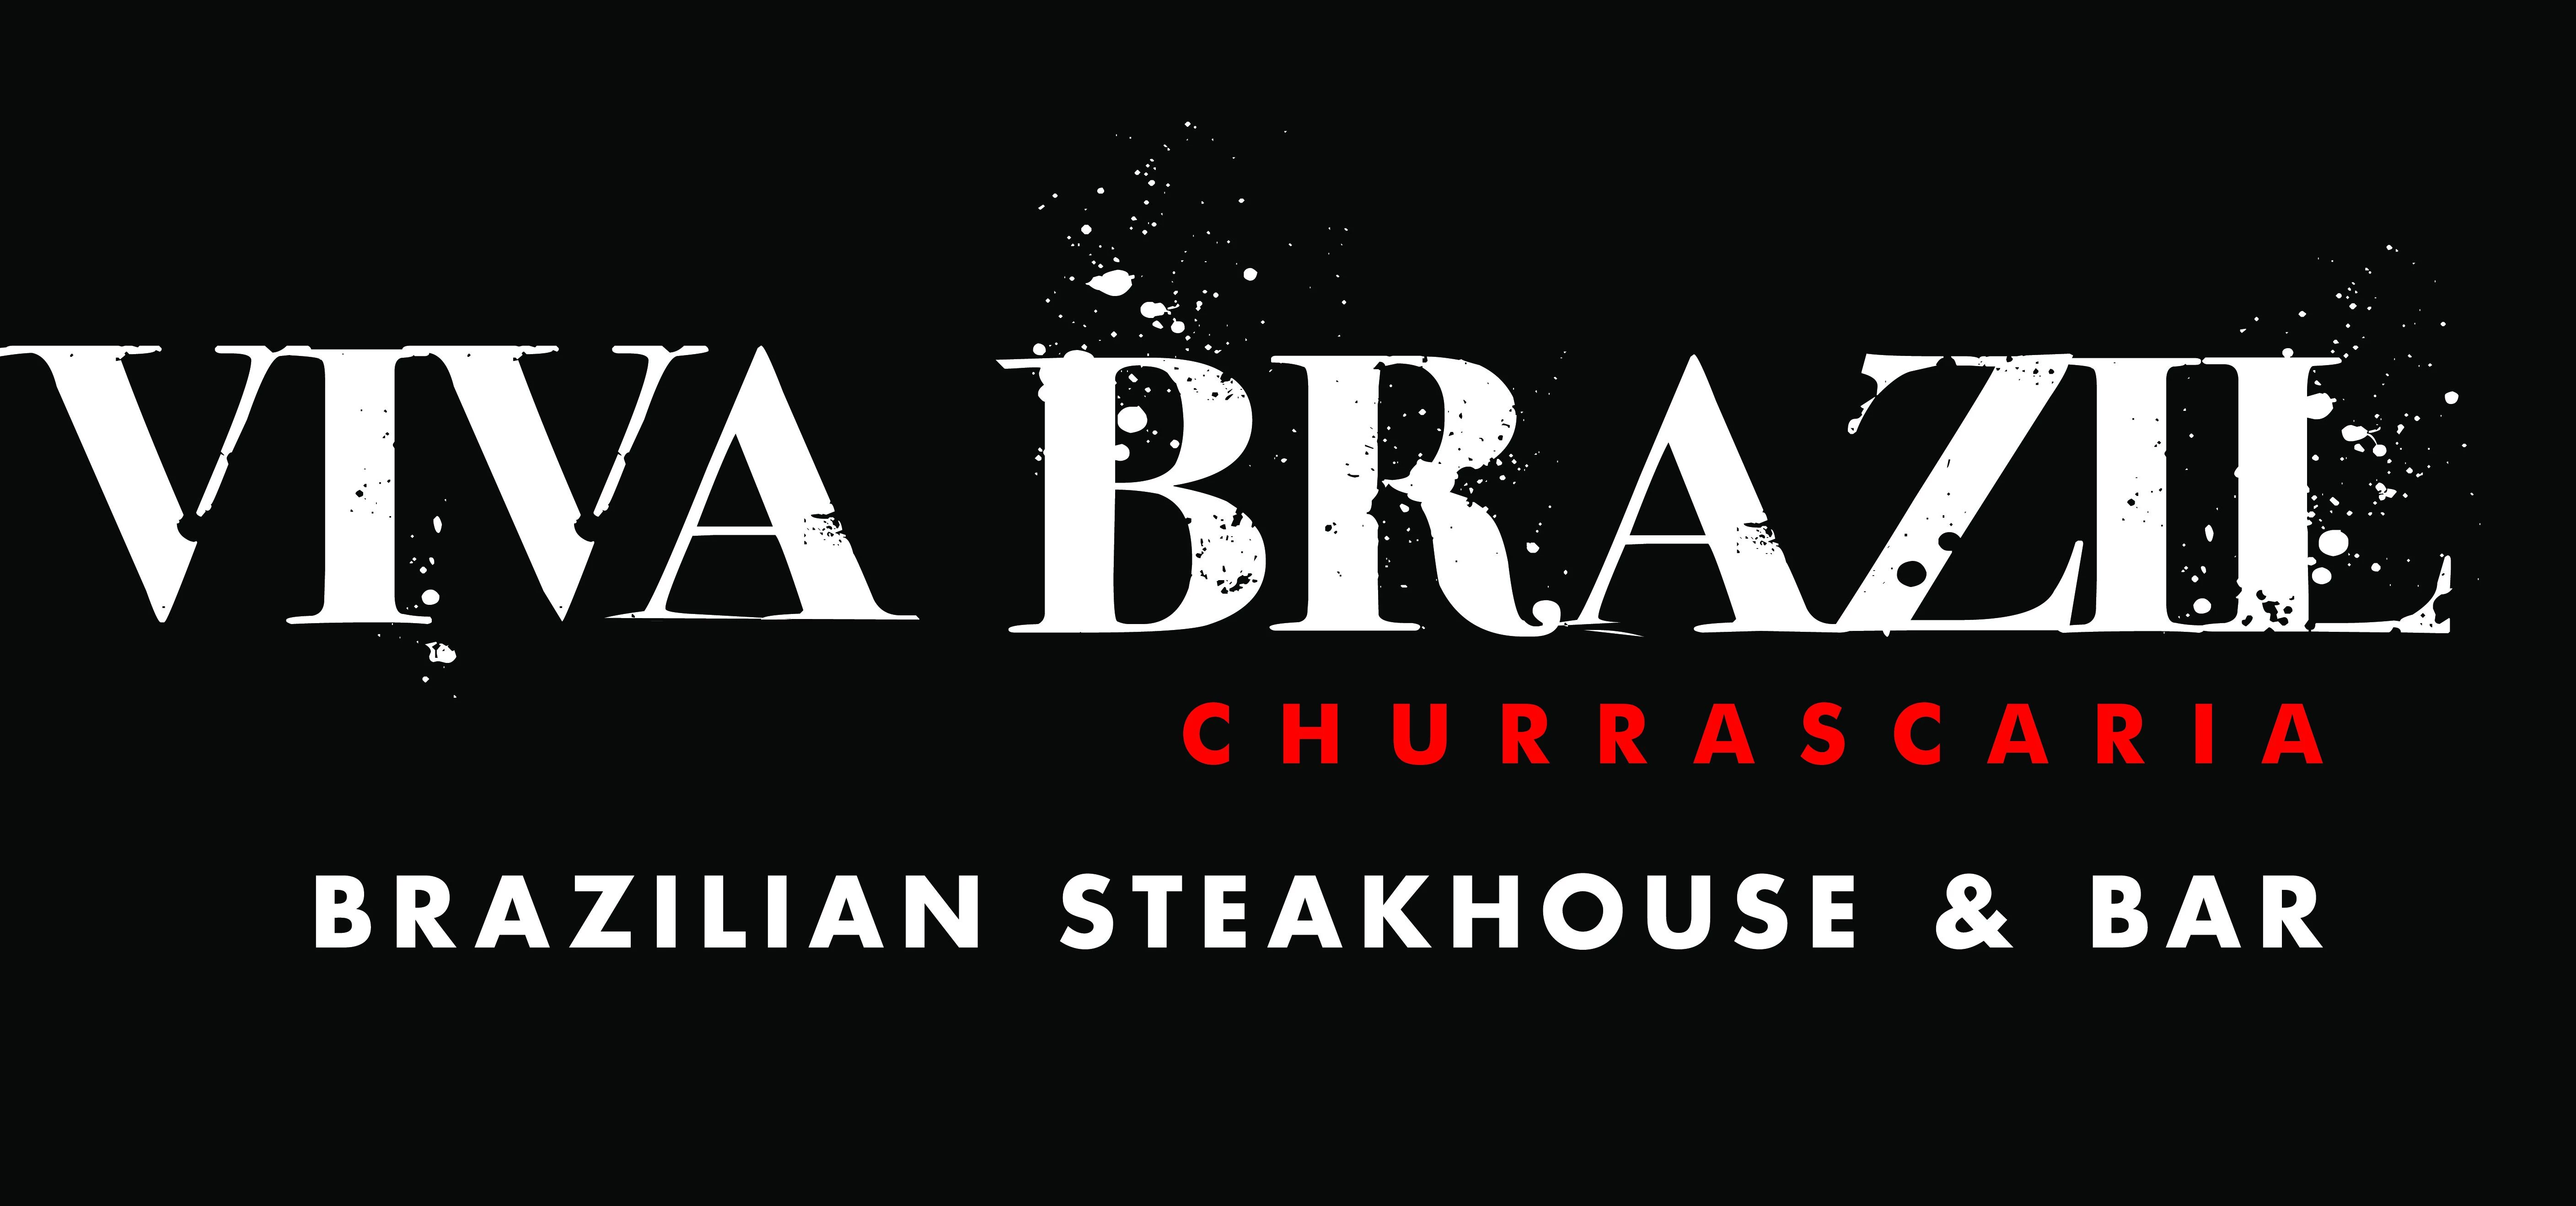 Viva Brazil, with restaurants in Liverpool, Glasgow, Cardiff and Newcastle, opens a pop-up site at t